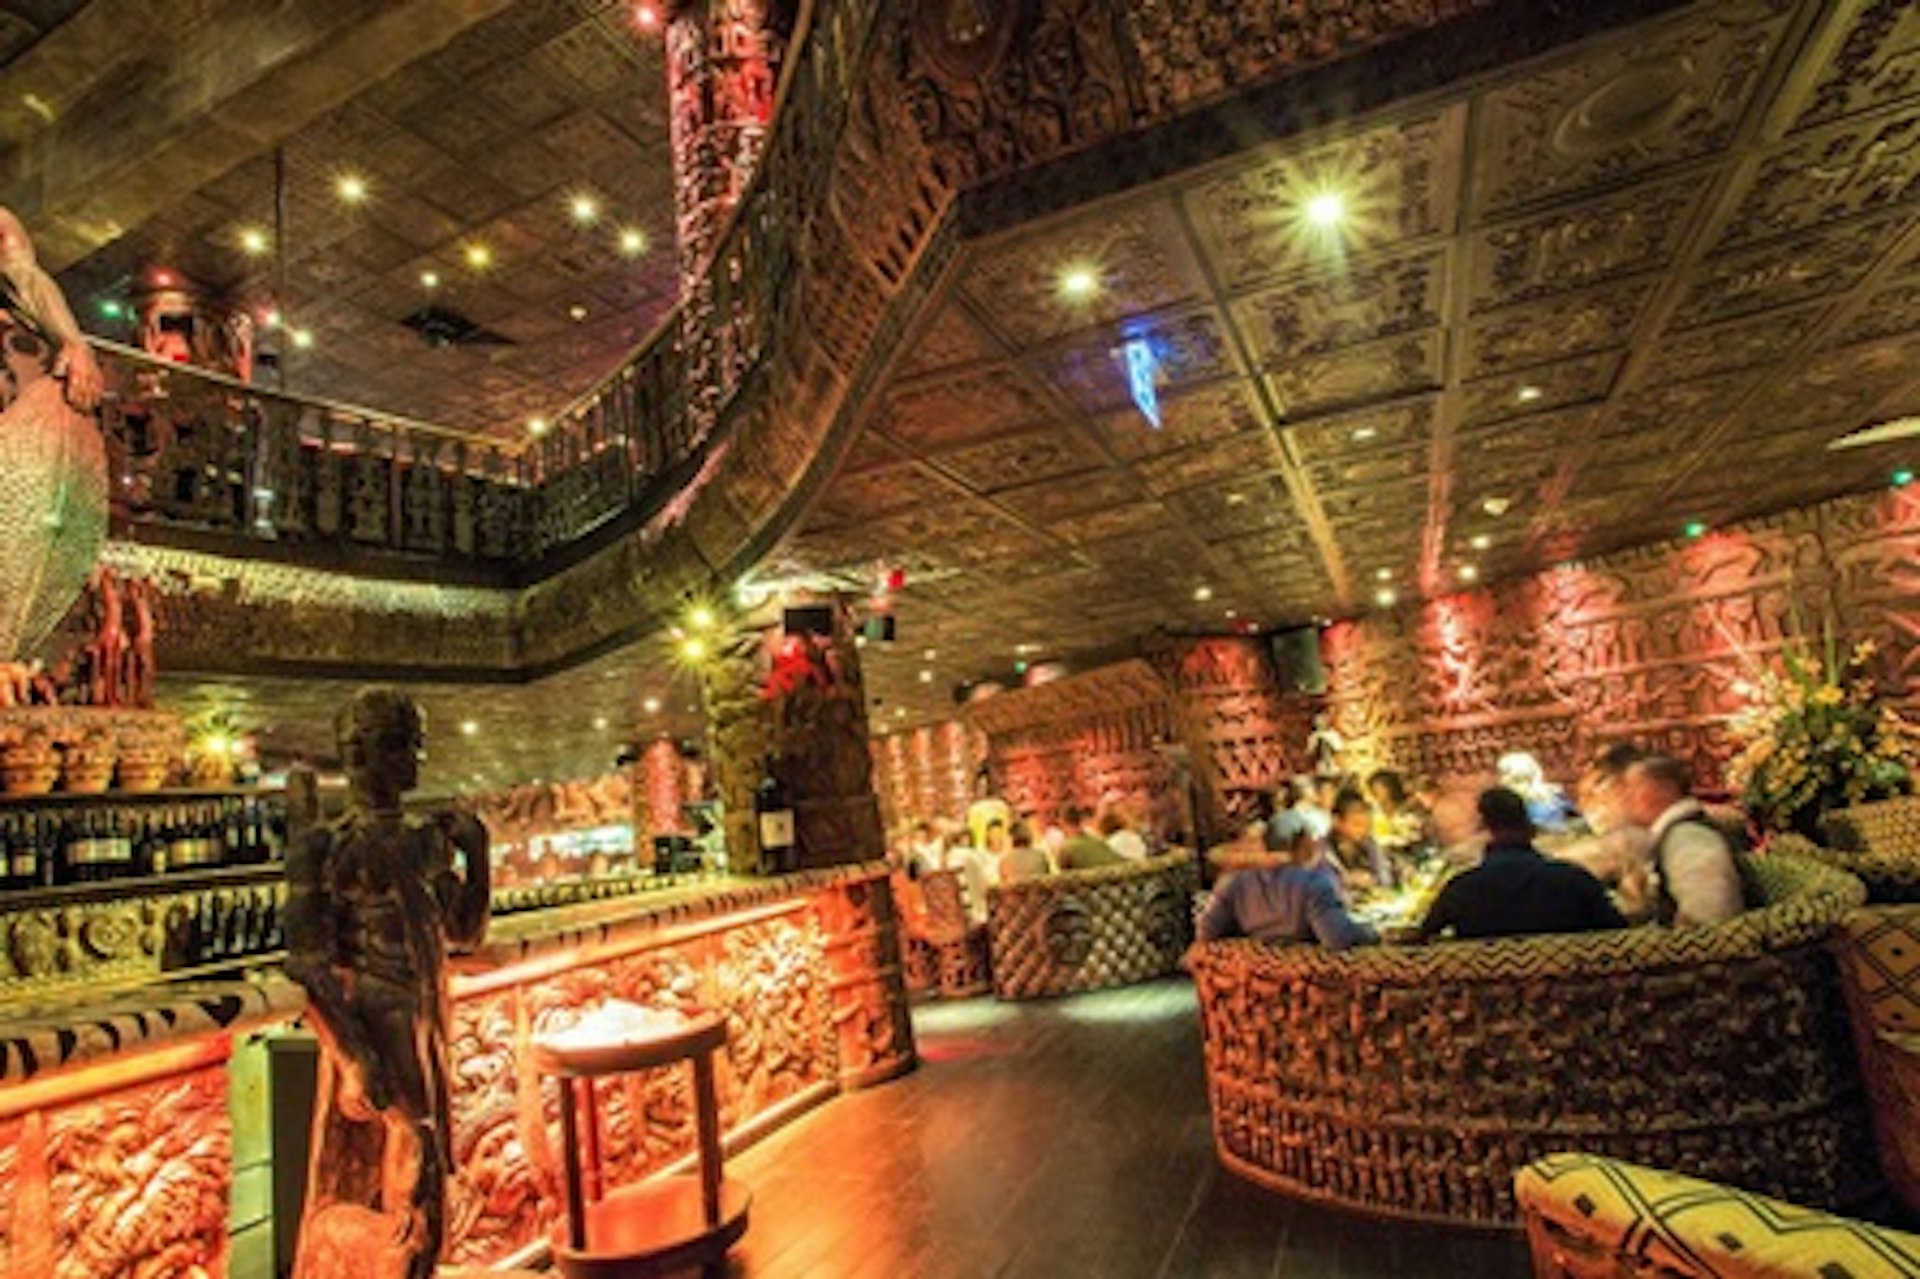 Three Course Meal for Two with Sparkling Cocktail at London's Shaka Zulu 3